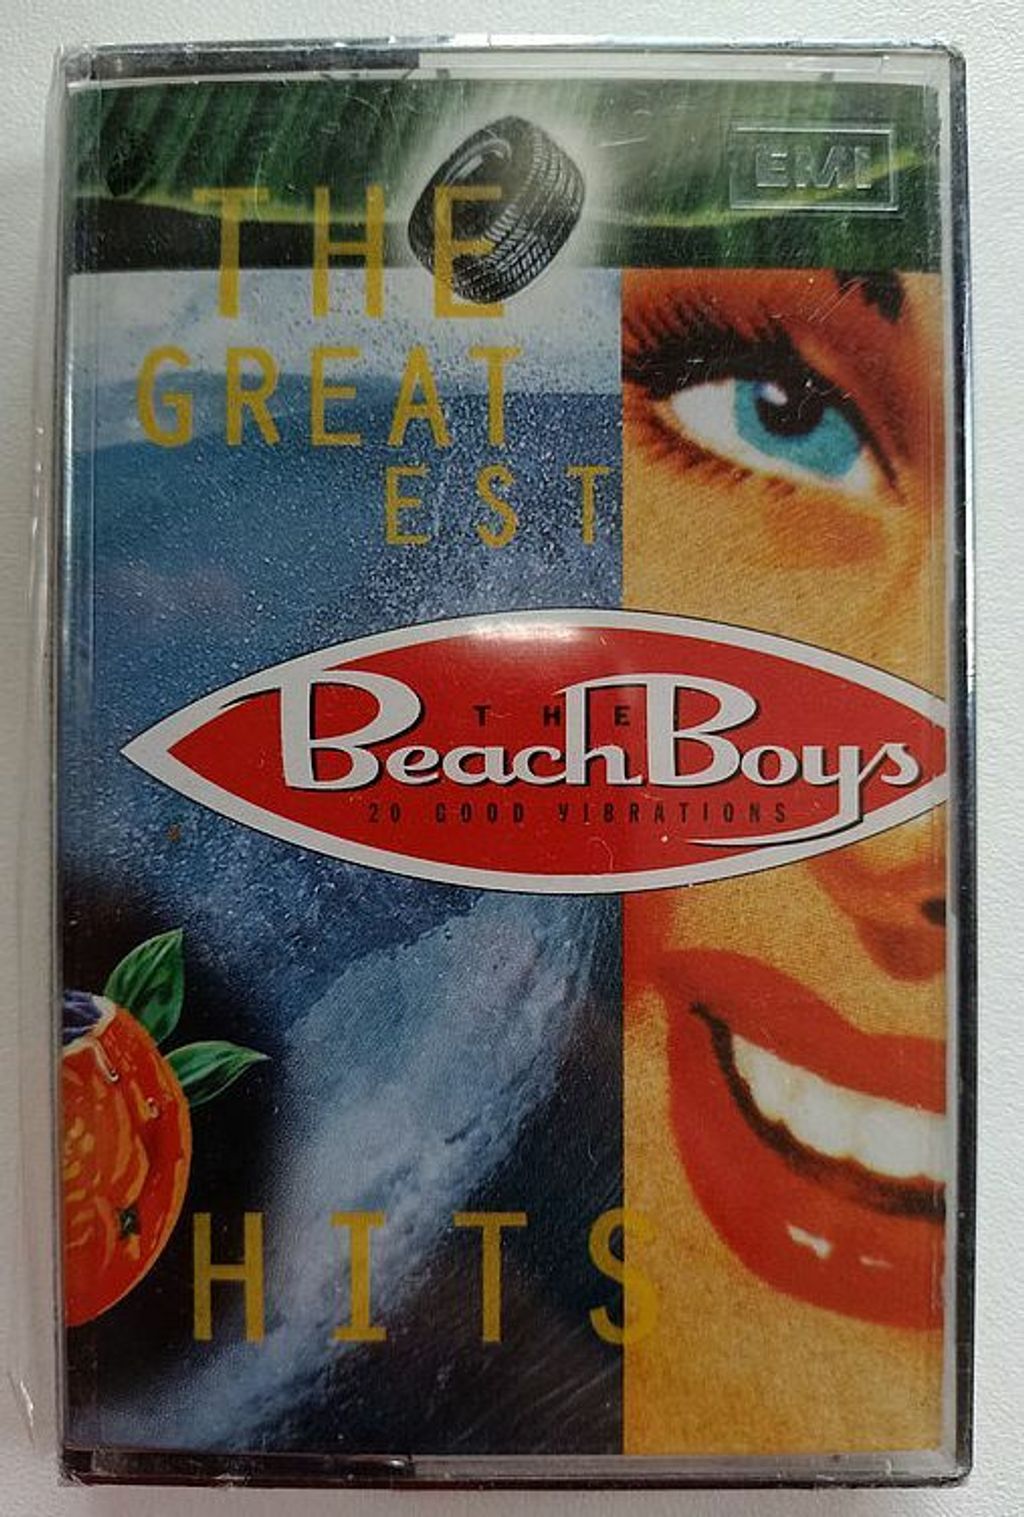 (Used) THE BEACH BOYS 20 Good Vibrations - The Greatest Hits CASSETTE TAPE.jpg